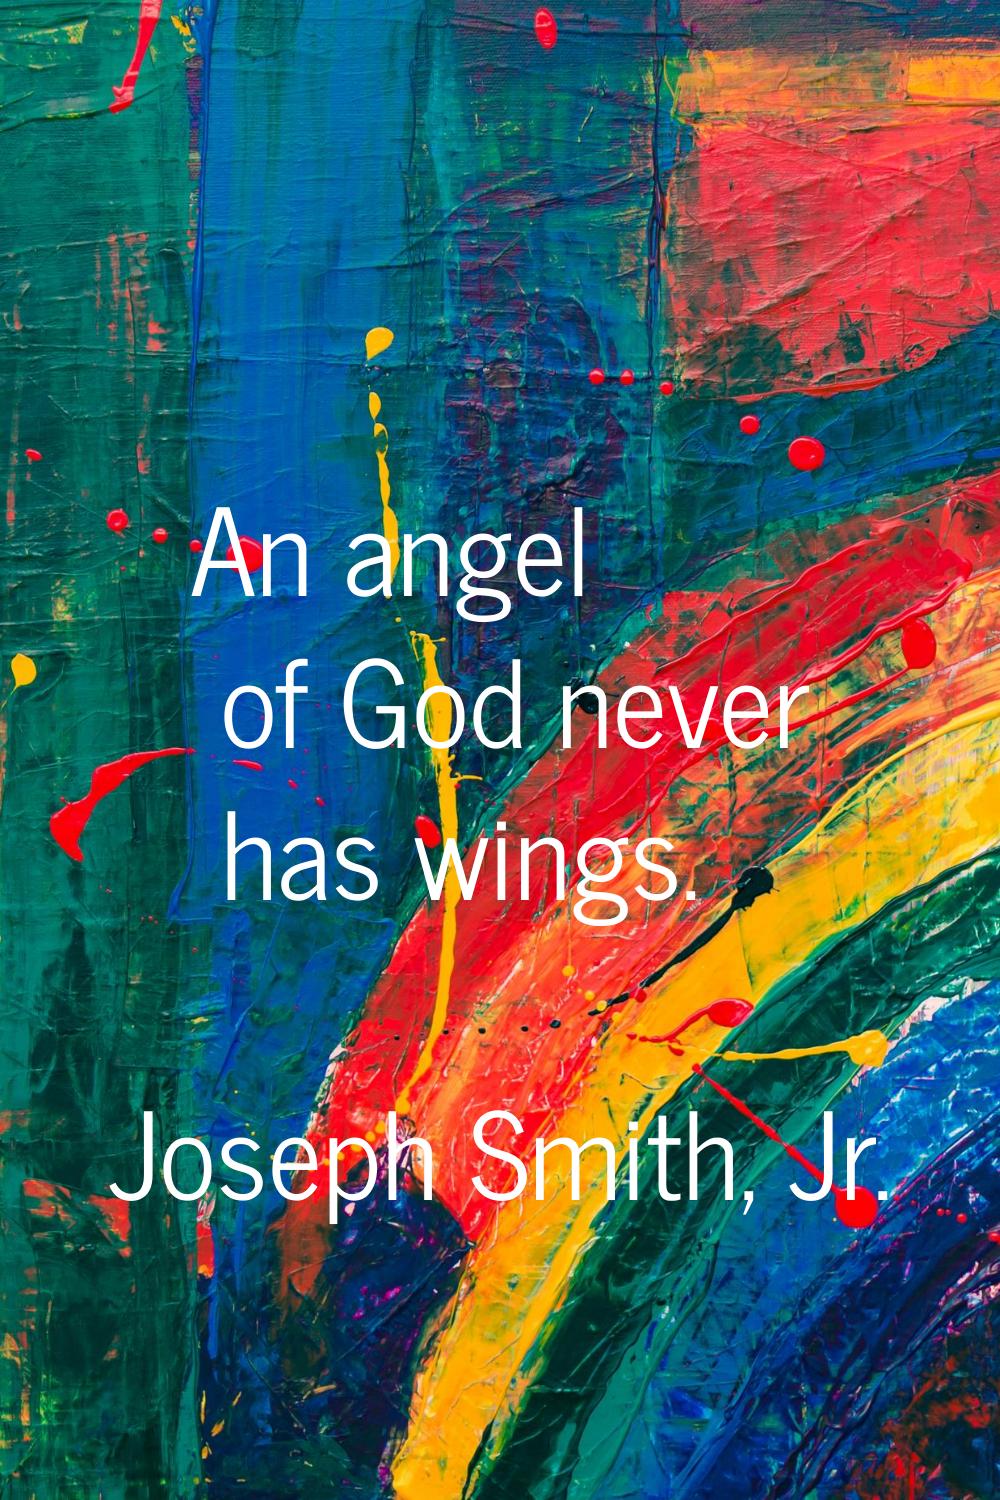 An angel of God never has wings.